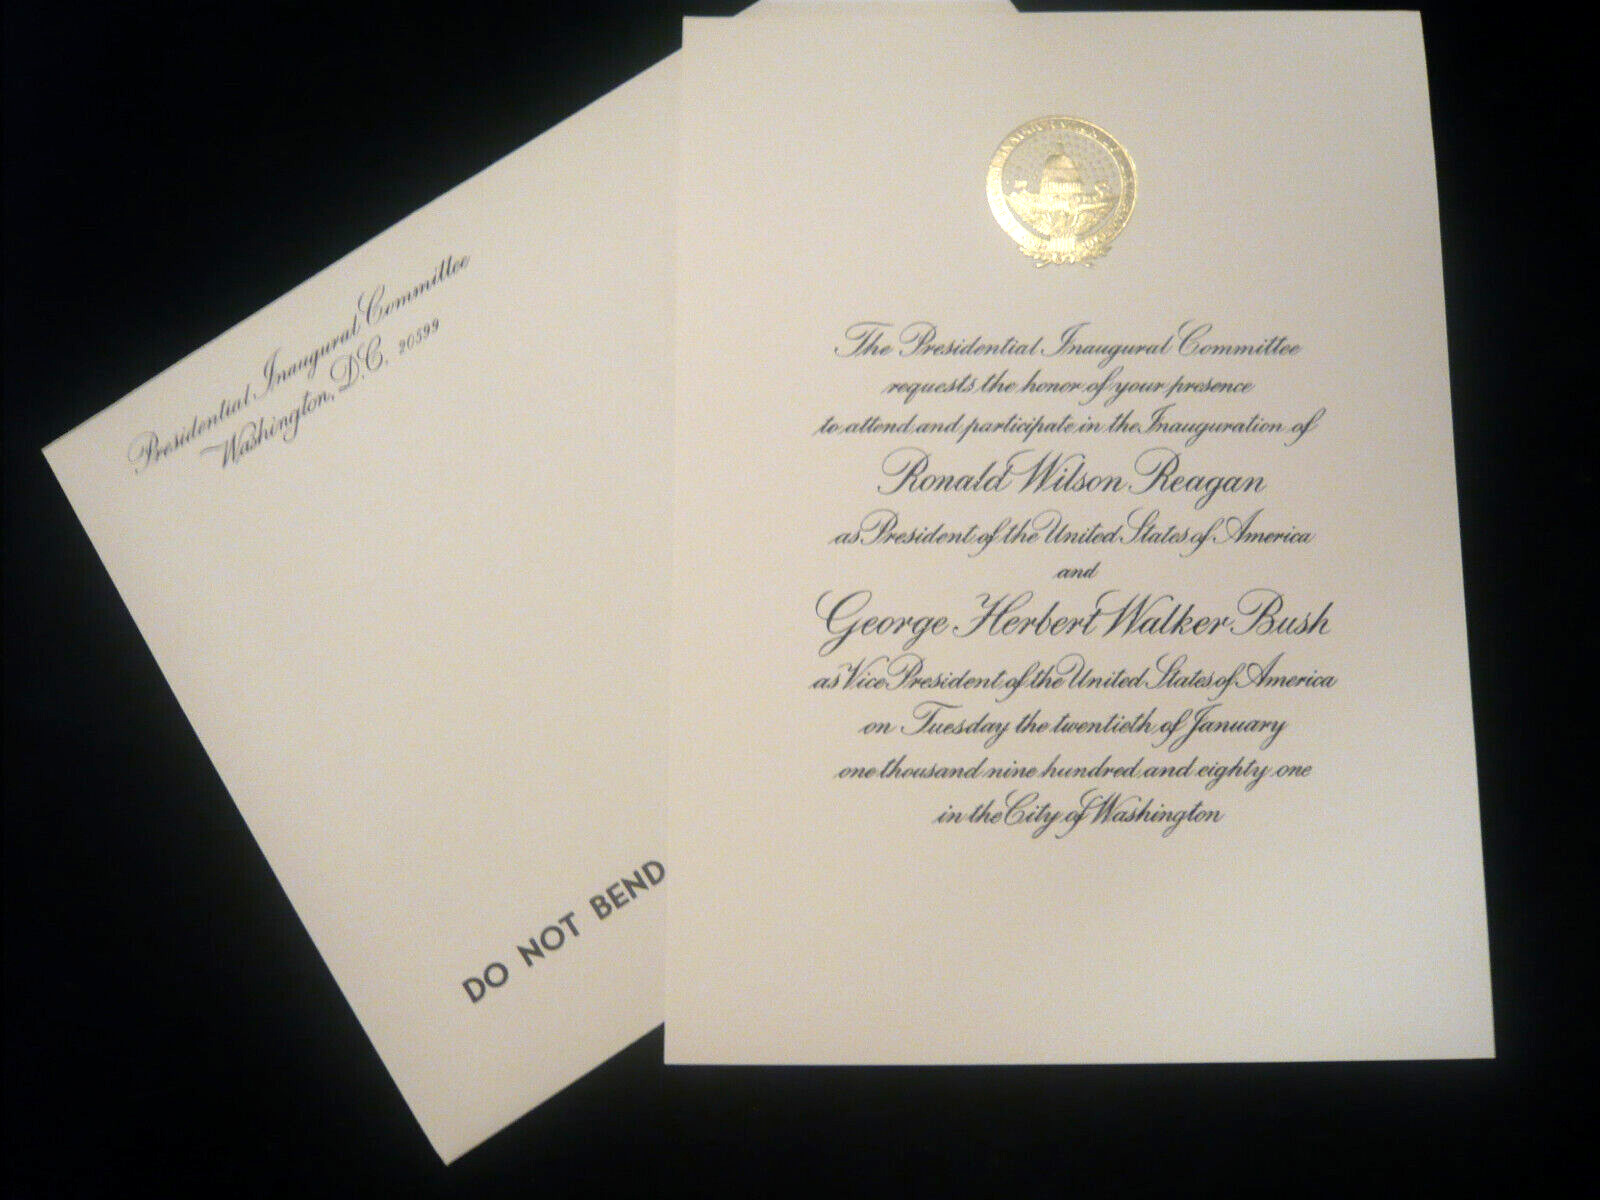 President Ronald Reagan and George Bush 1981 Official Inaugration Invitation